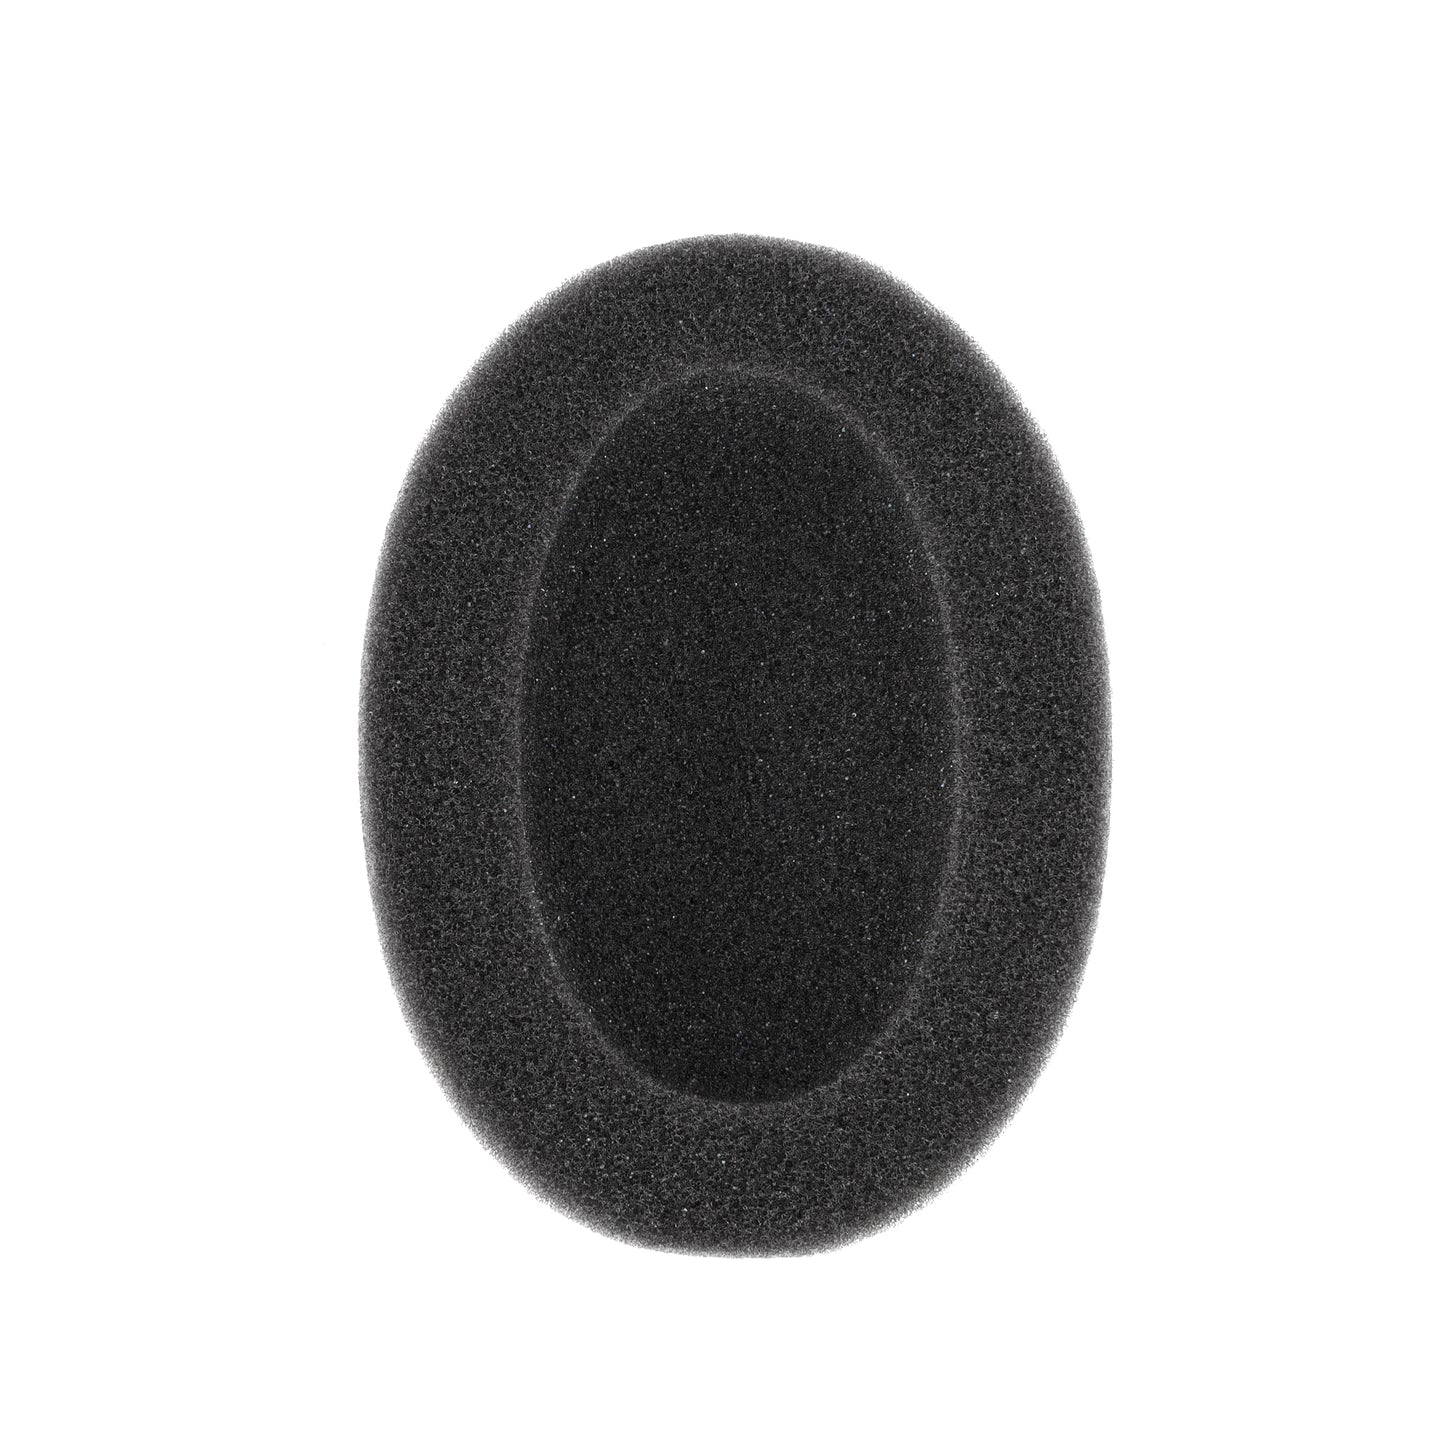 Replacement Ear Foam for Peltor Comtac Headsets